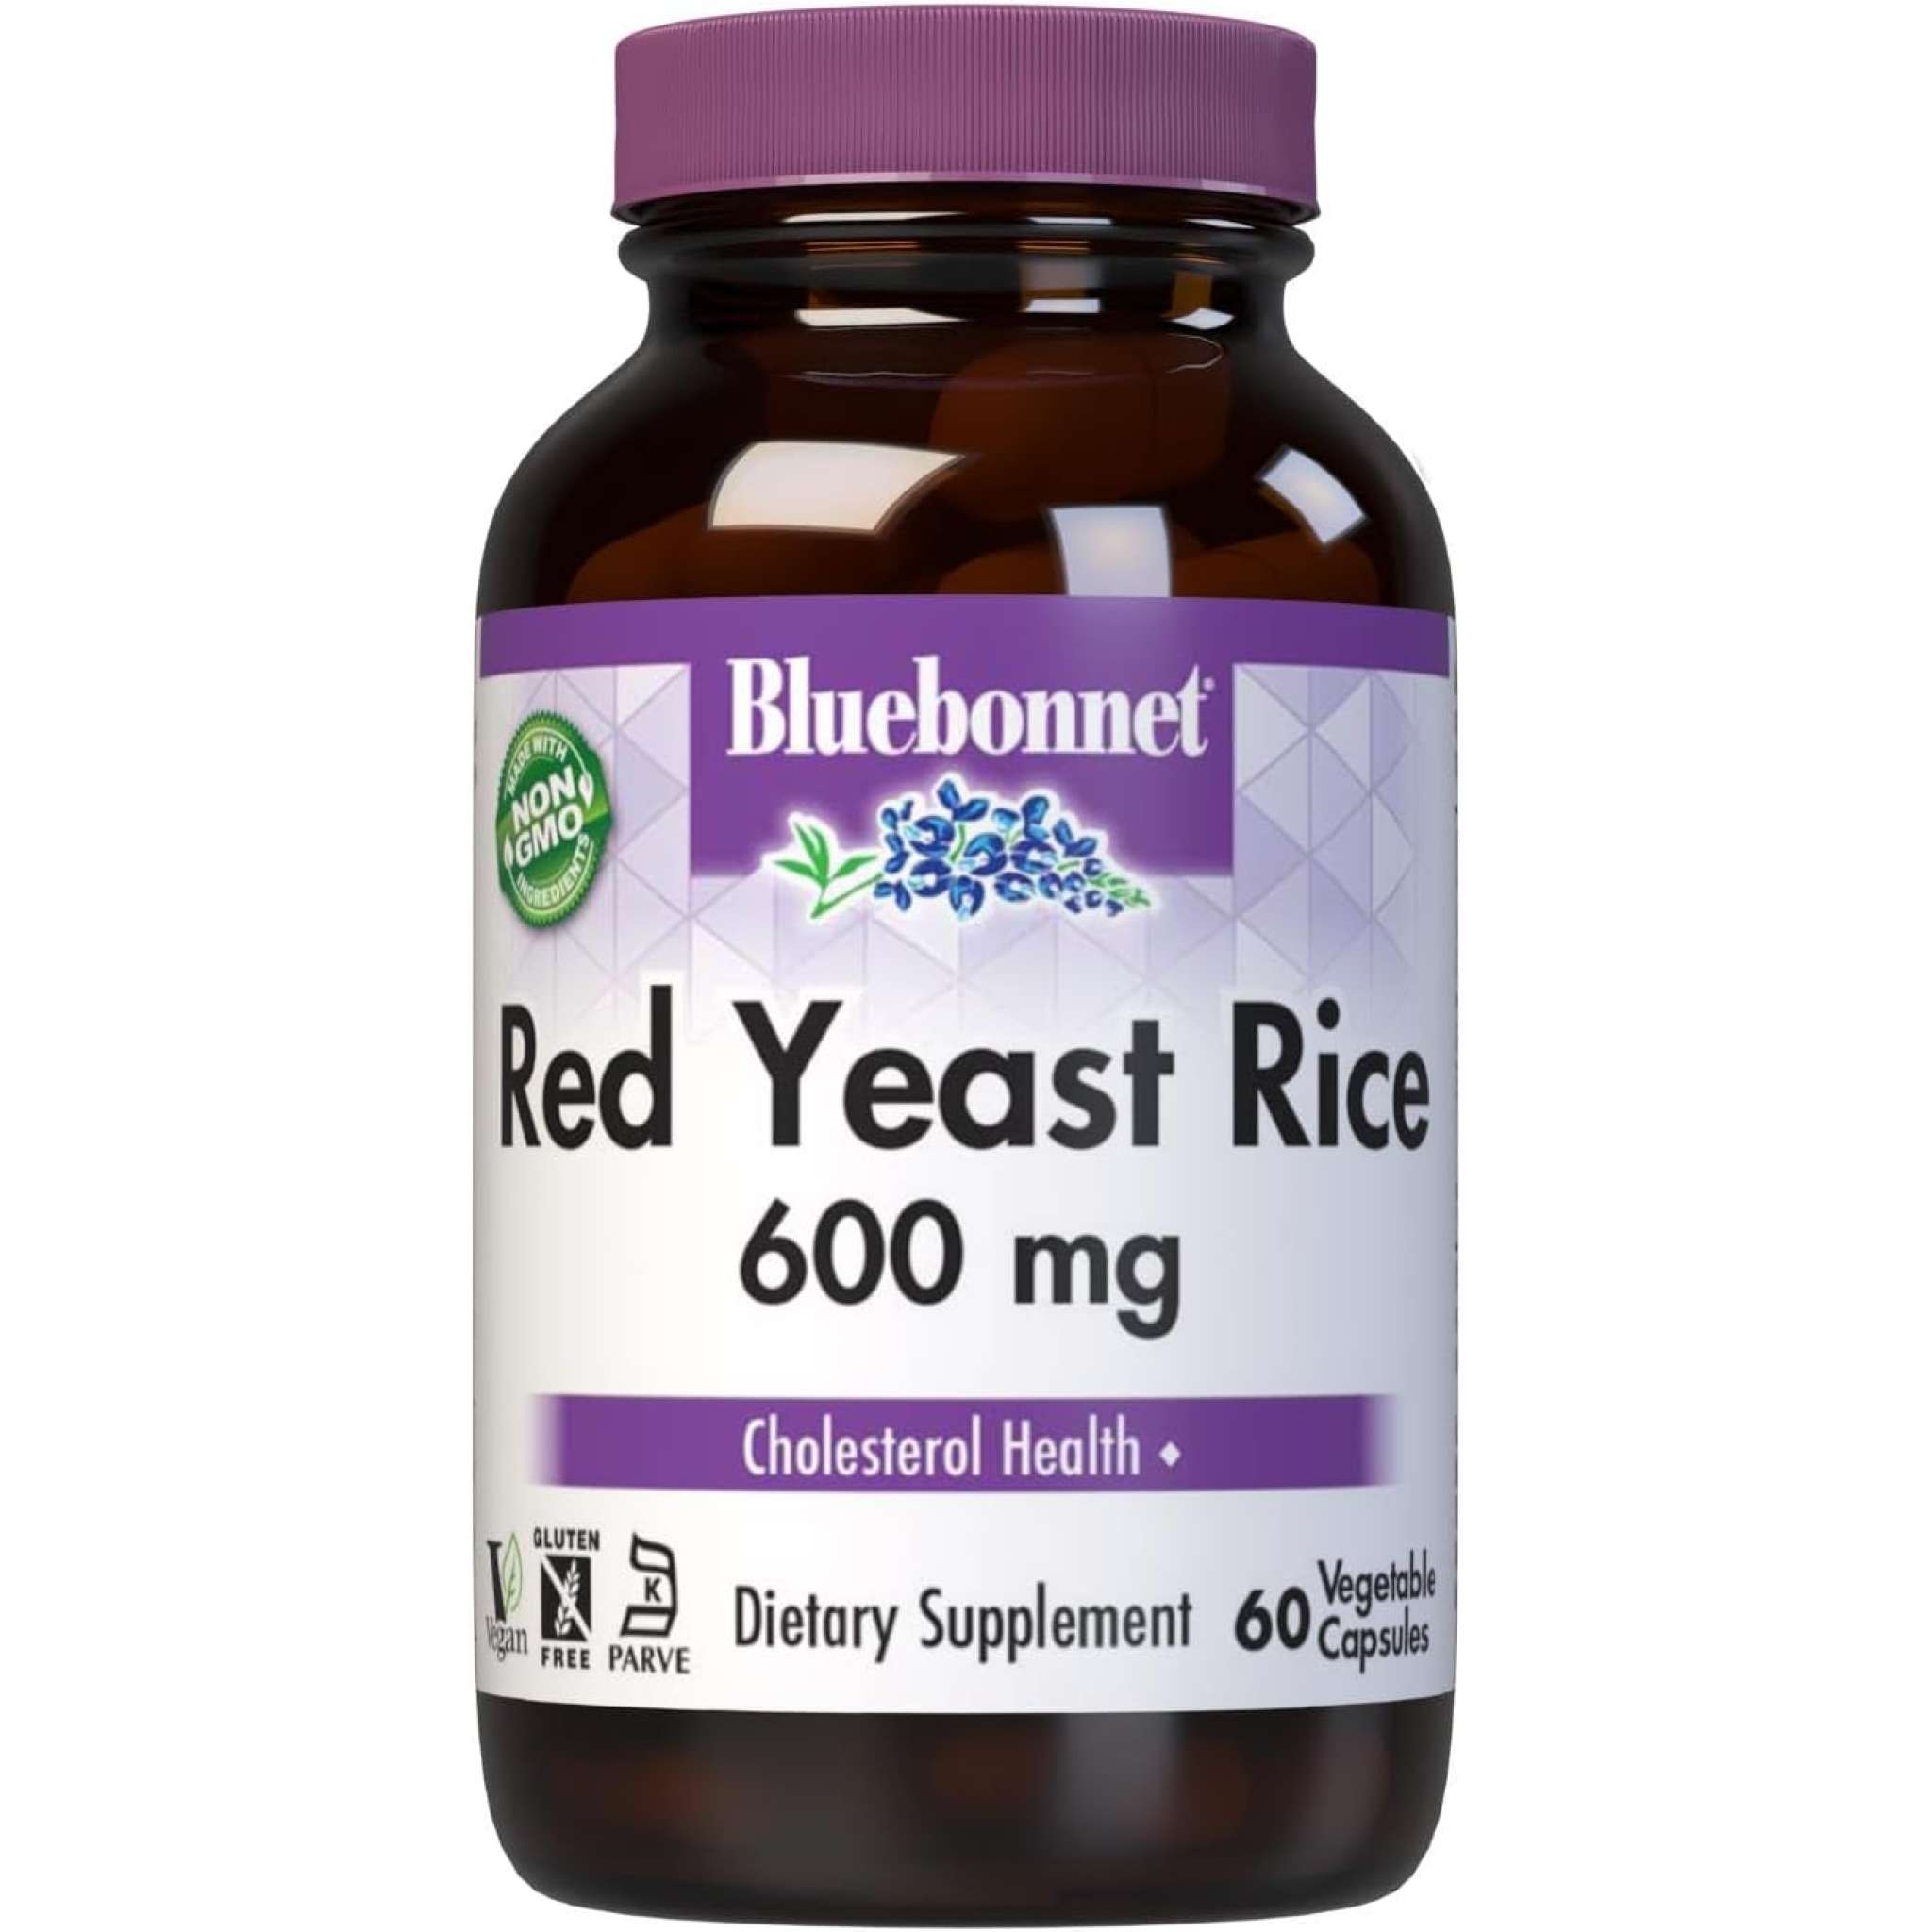 Bluebonnet - Red Yeast Rice 600 mg